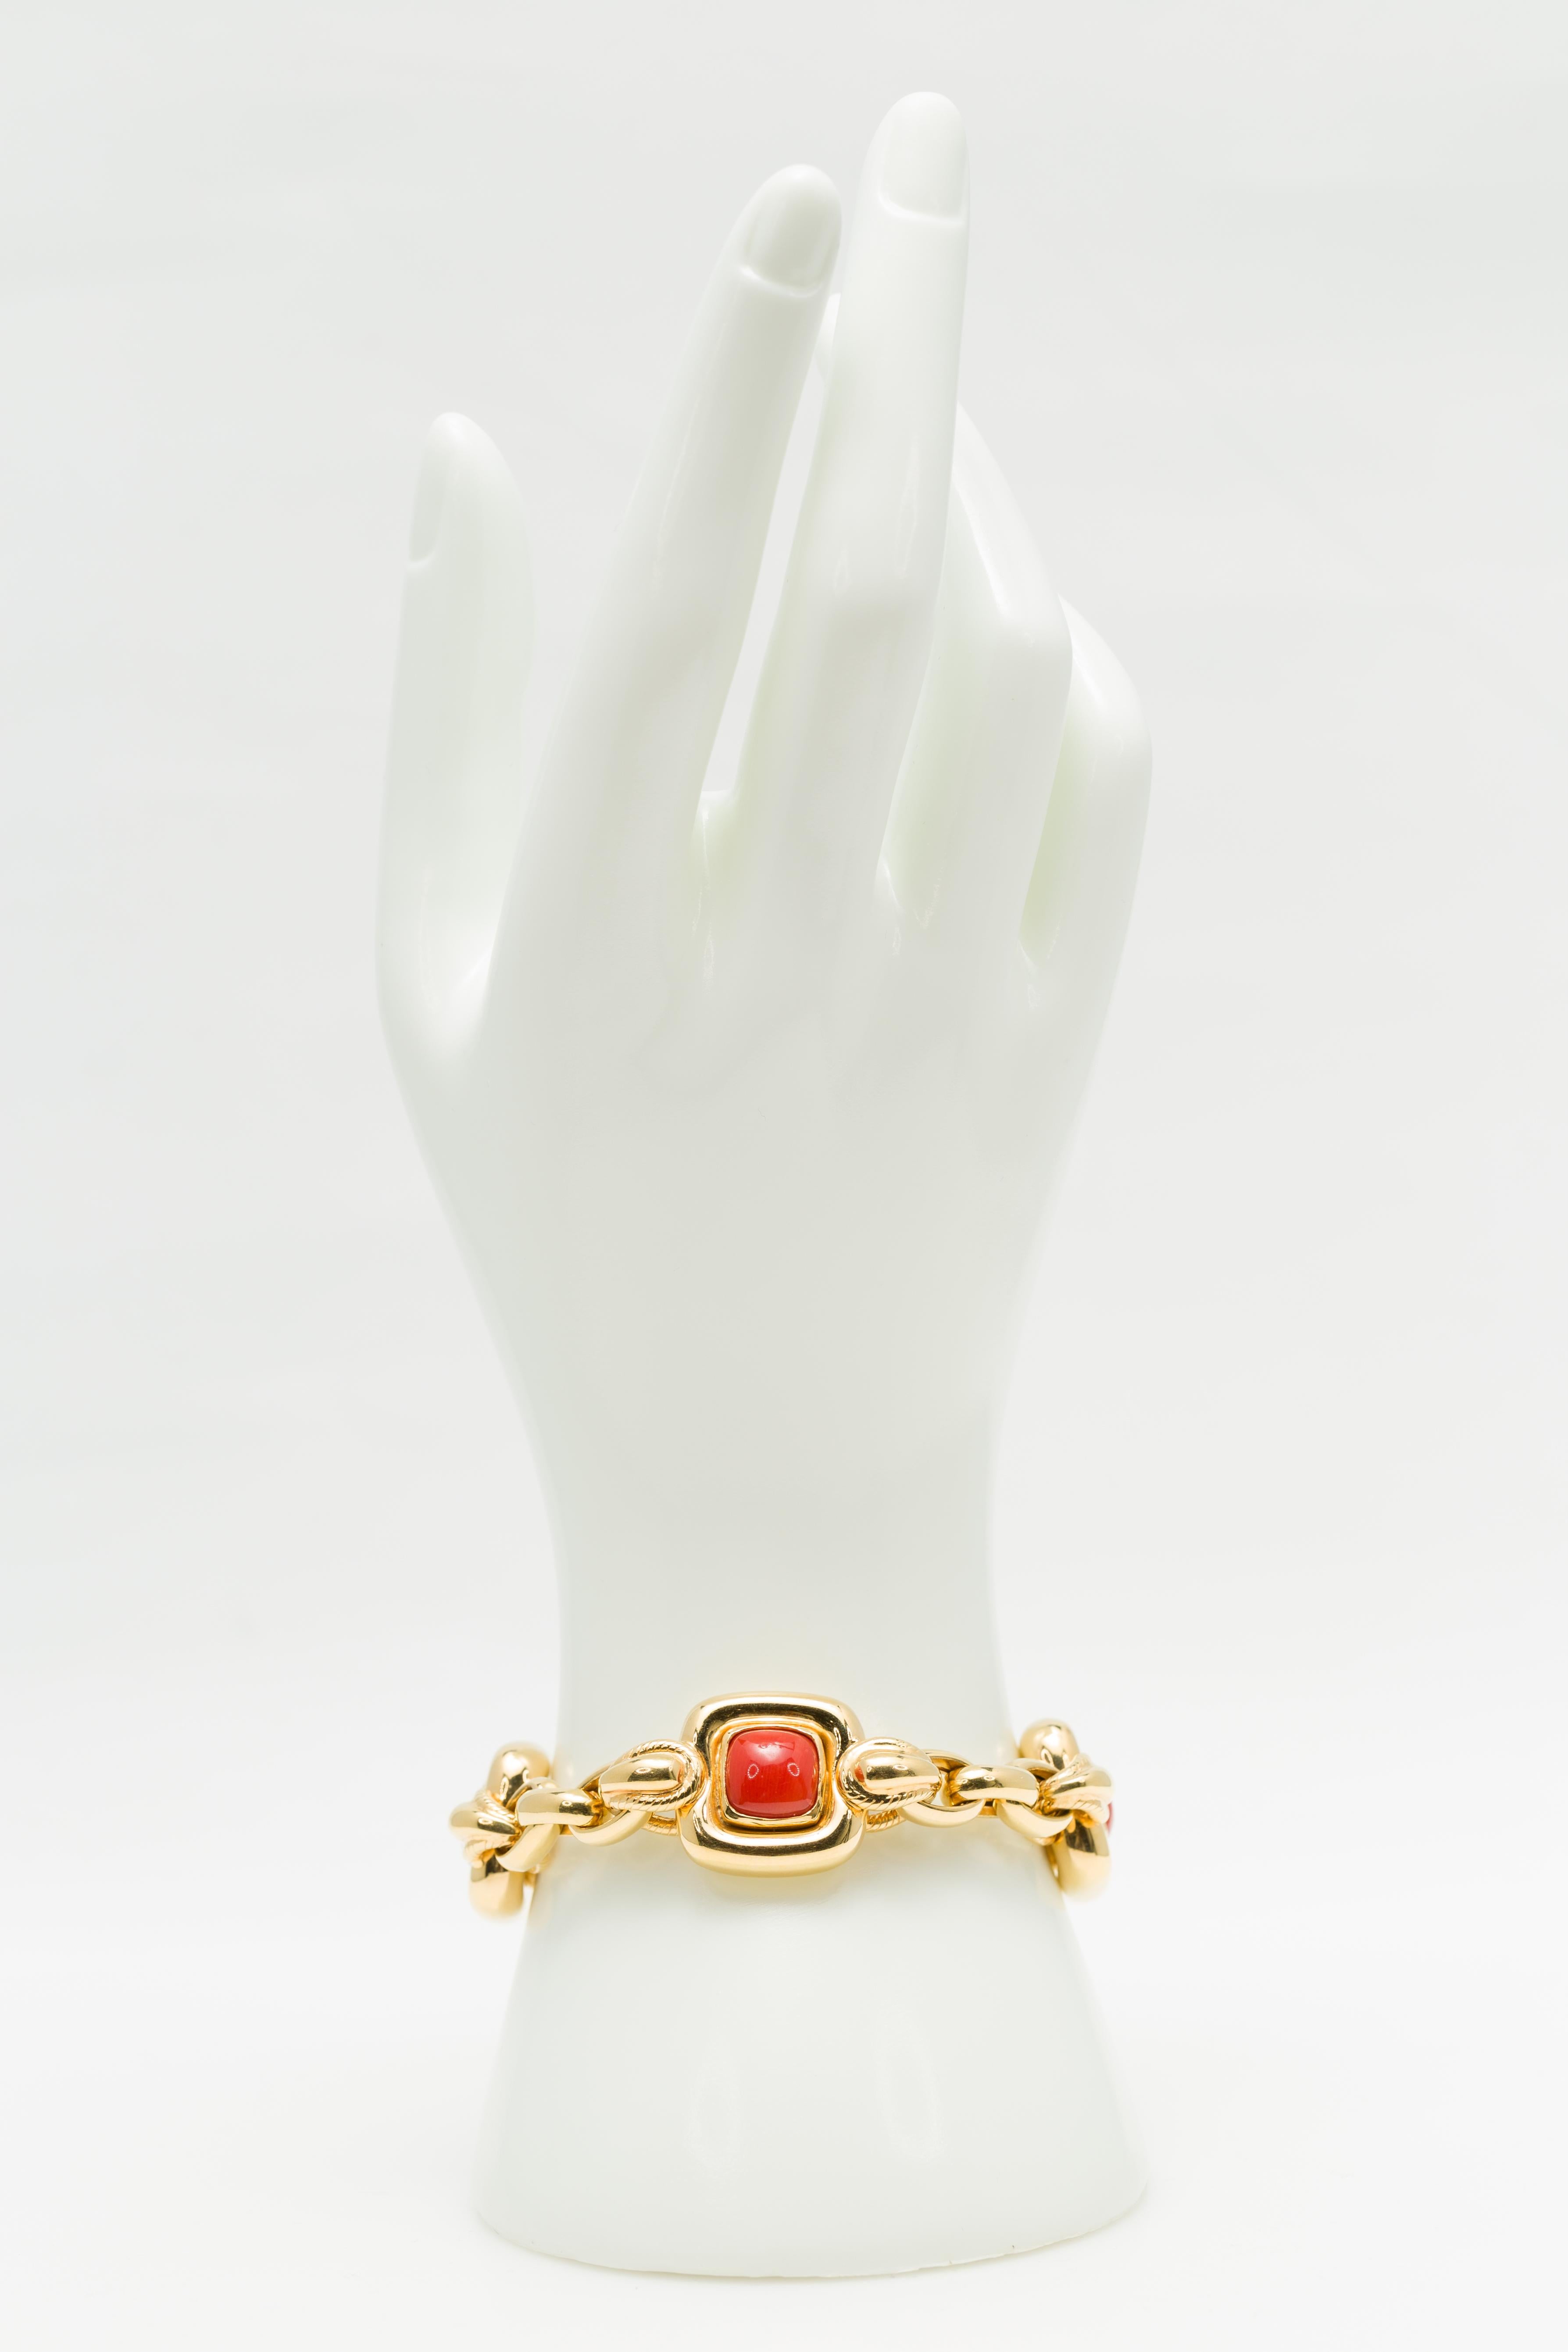 An Italian vintage cabochon Mediterranean Coral bracelet in 18K yellow gold, circa 1970. Featuring natural untreated cabochon Mediterranean Corals of a deep salmony red hue very well matched in size and color and set in 18K yellow gold, this stylish